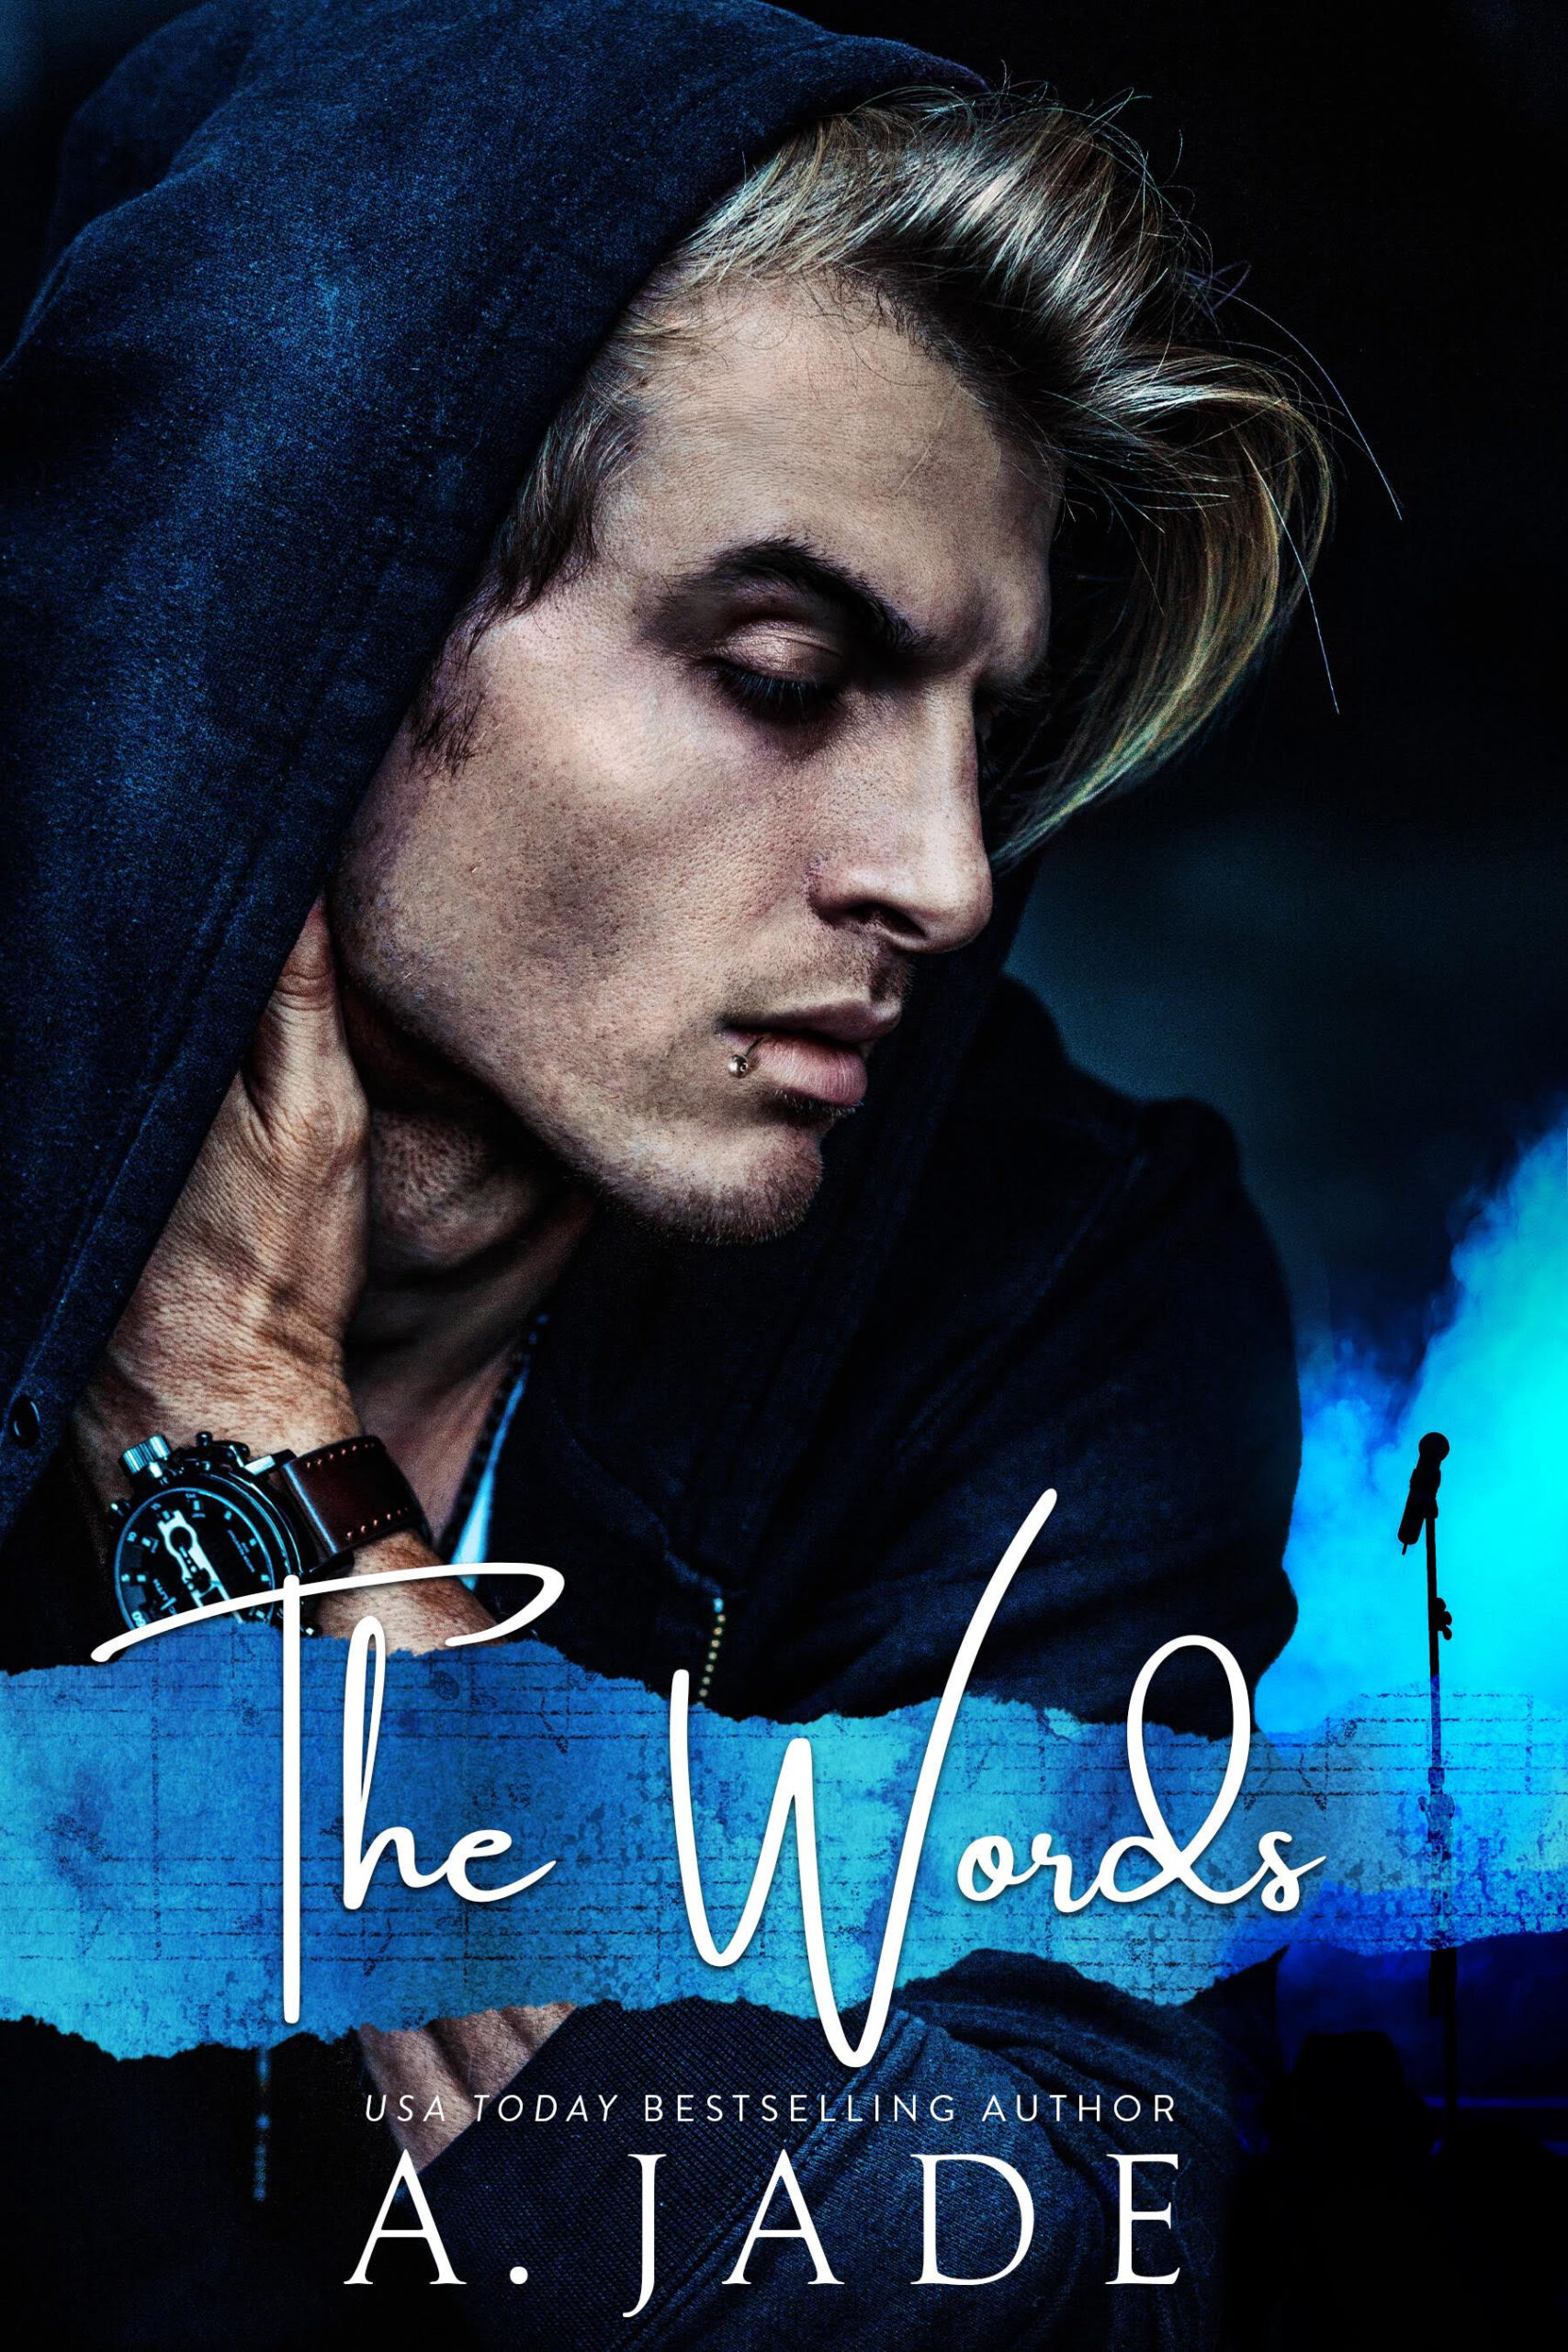 Cover of The Words